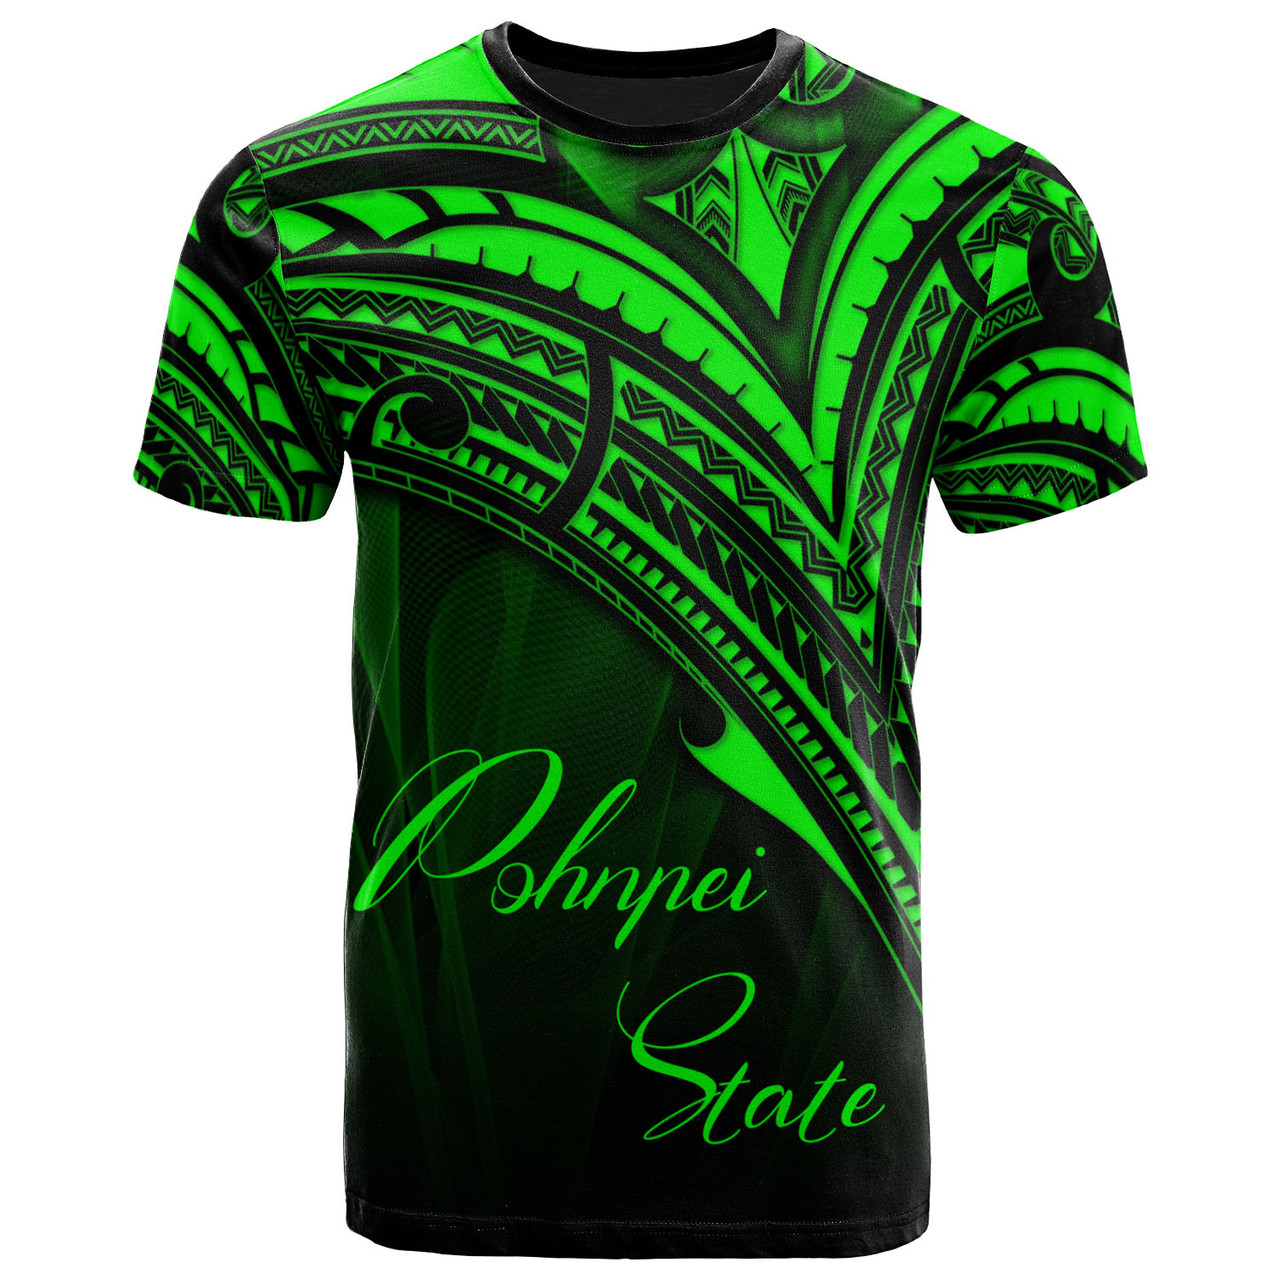 Pohnpei State T-Shirt - Green Color Cross Style